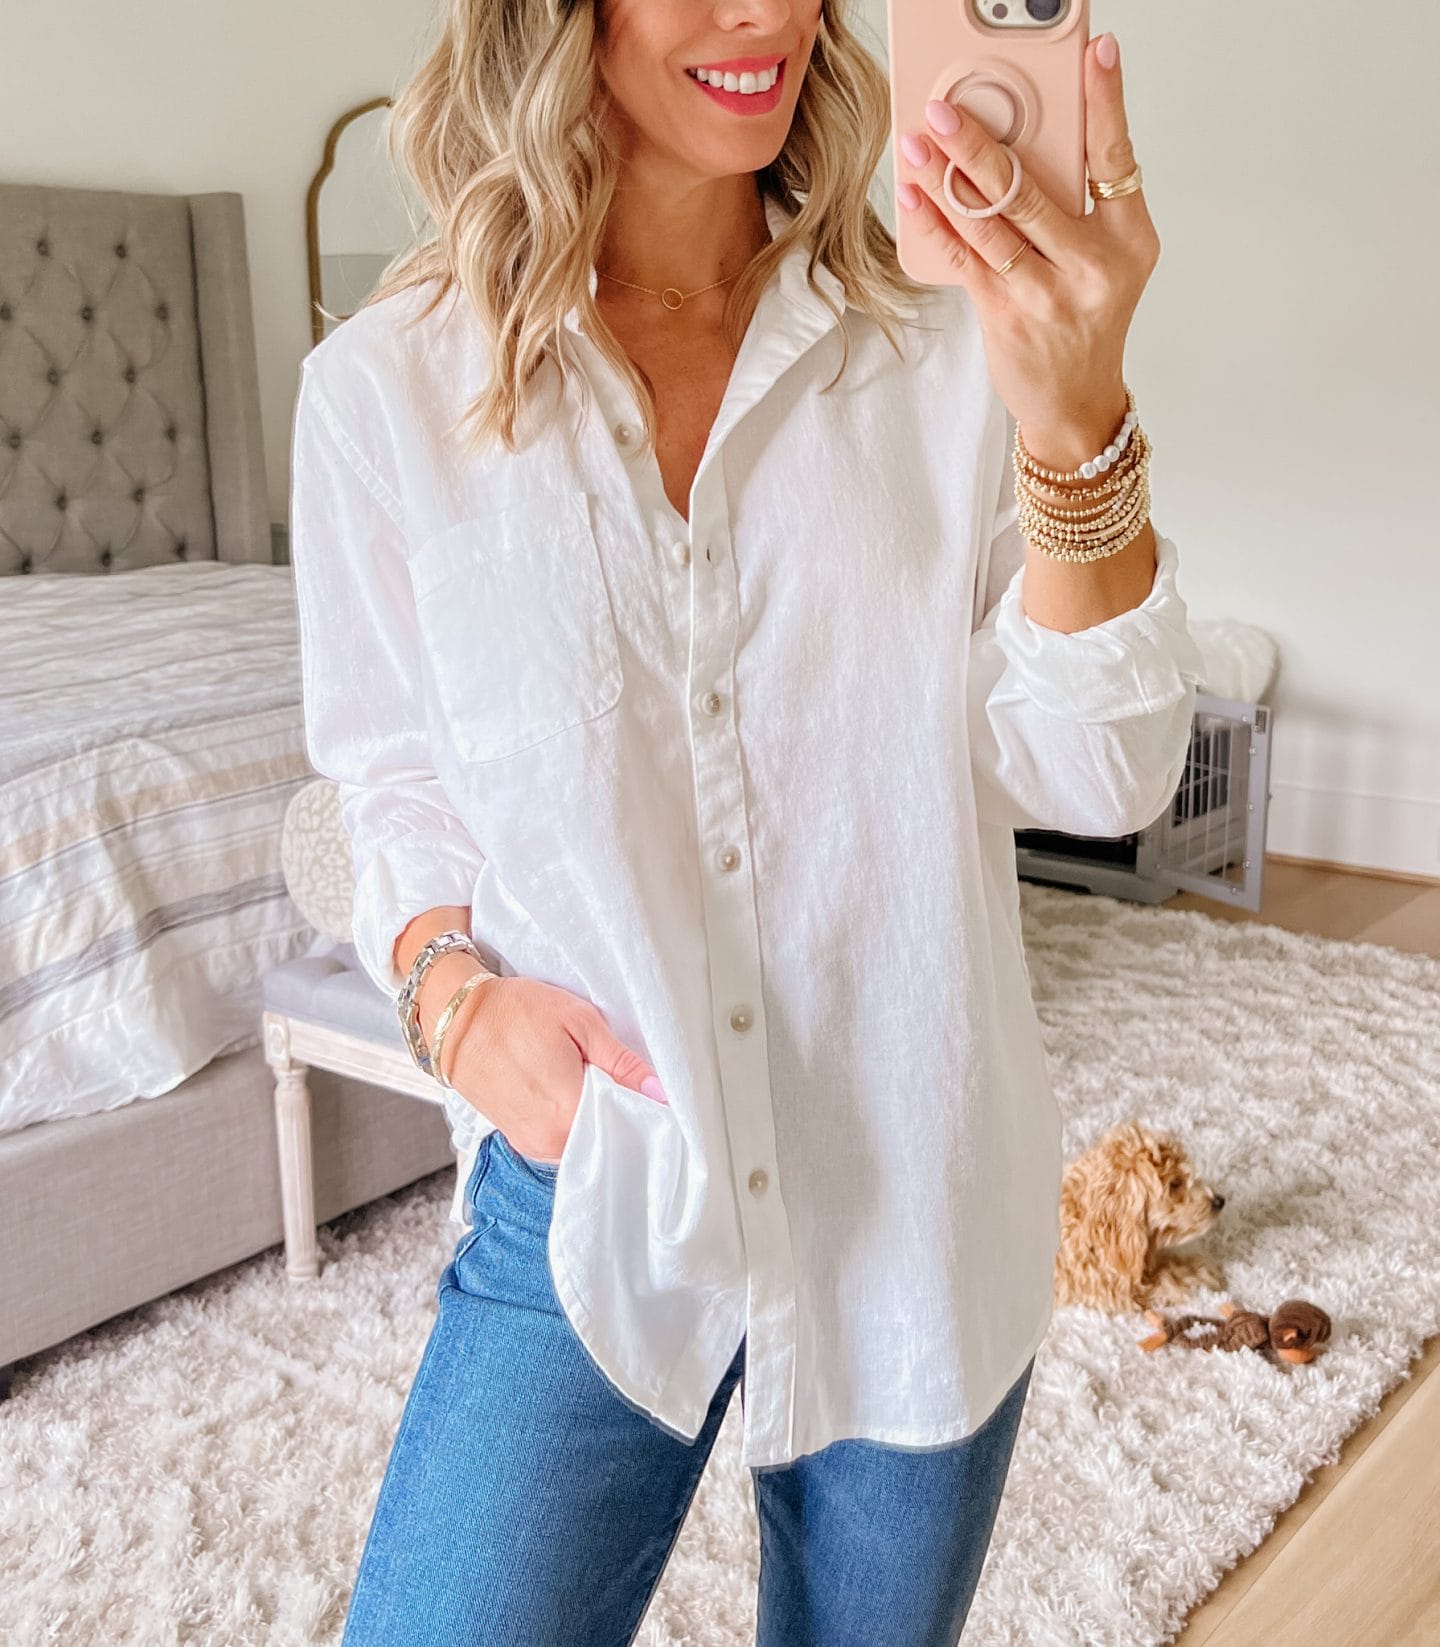 White Button Down Top, Jeans, Wedges 